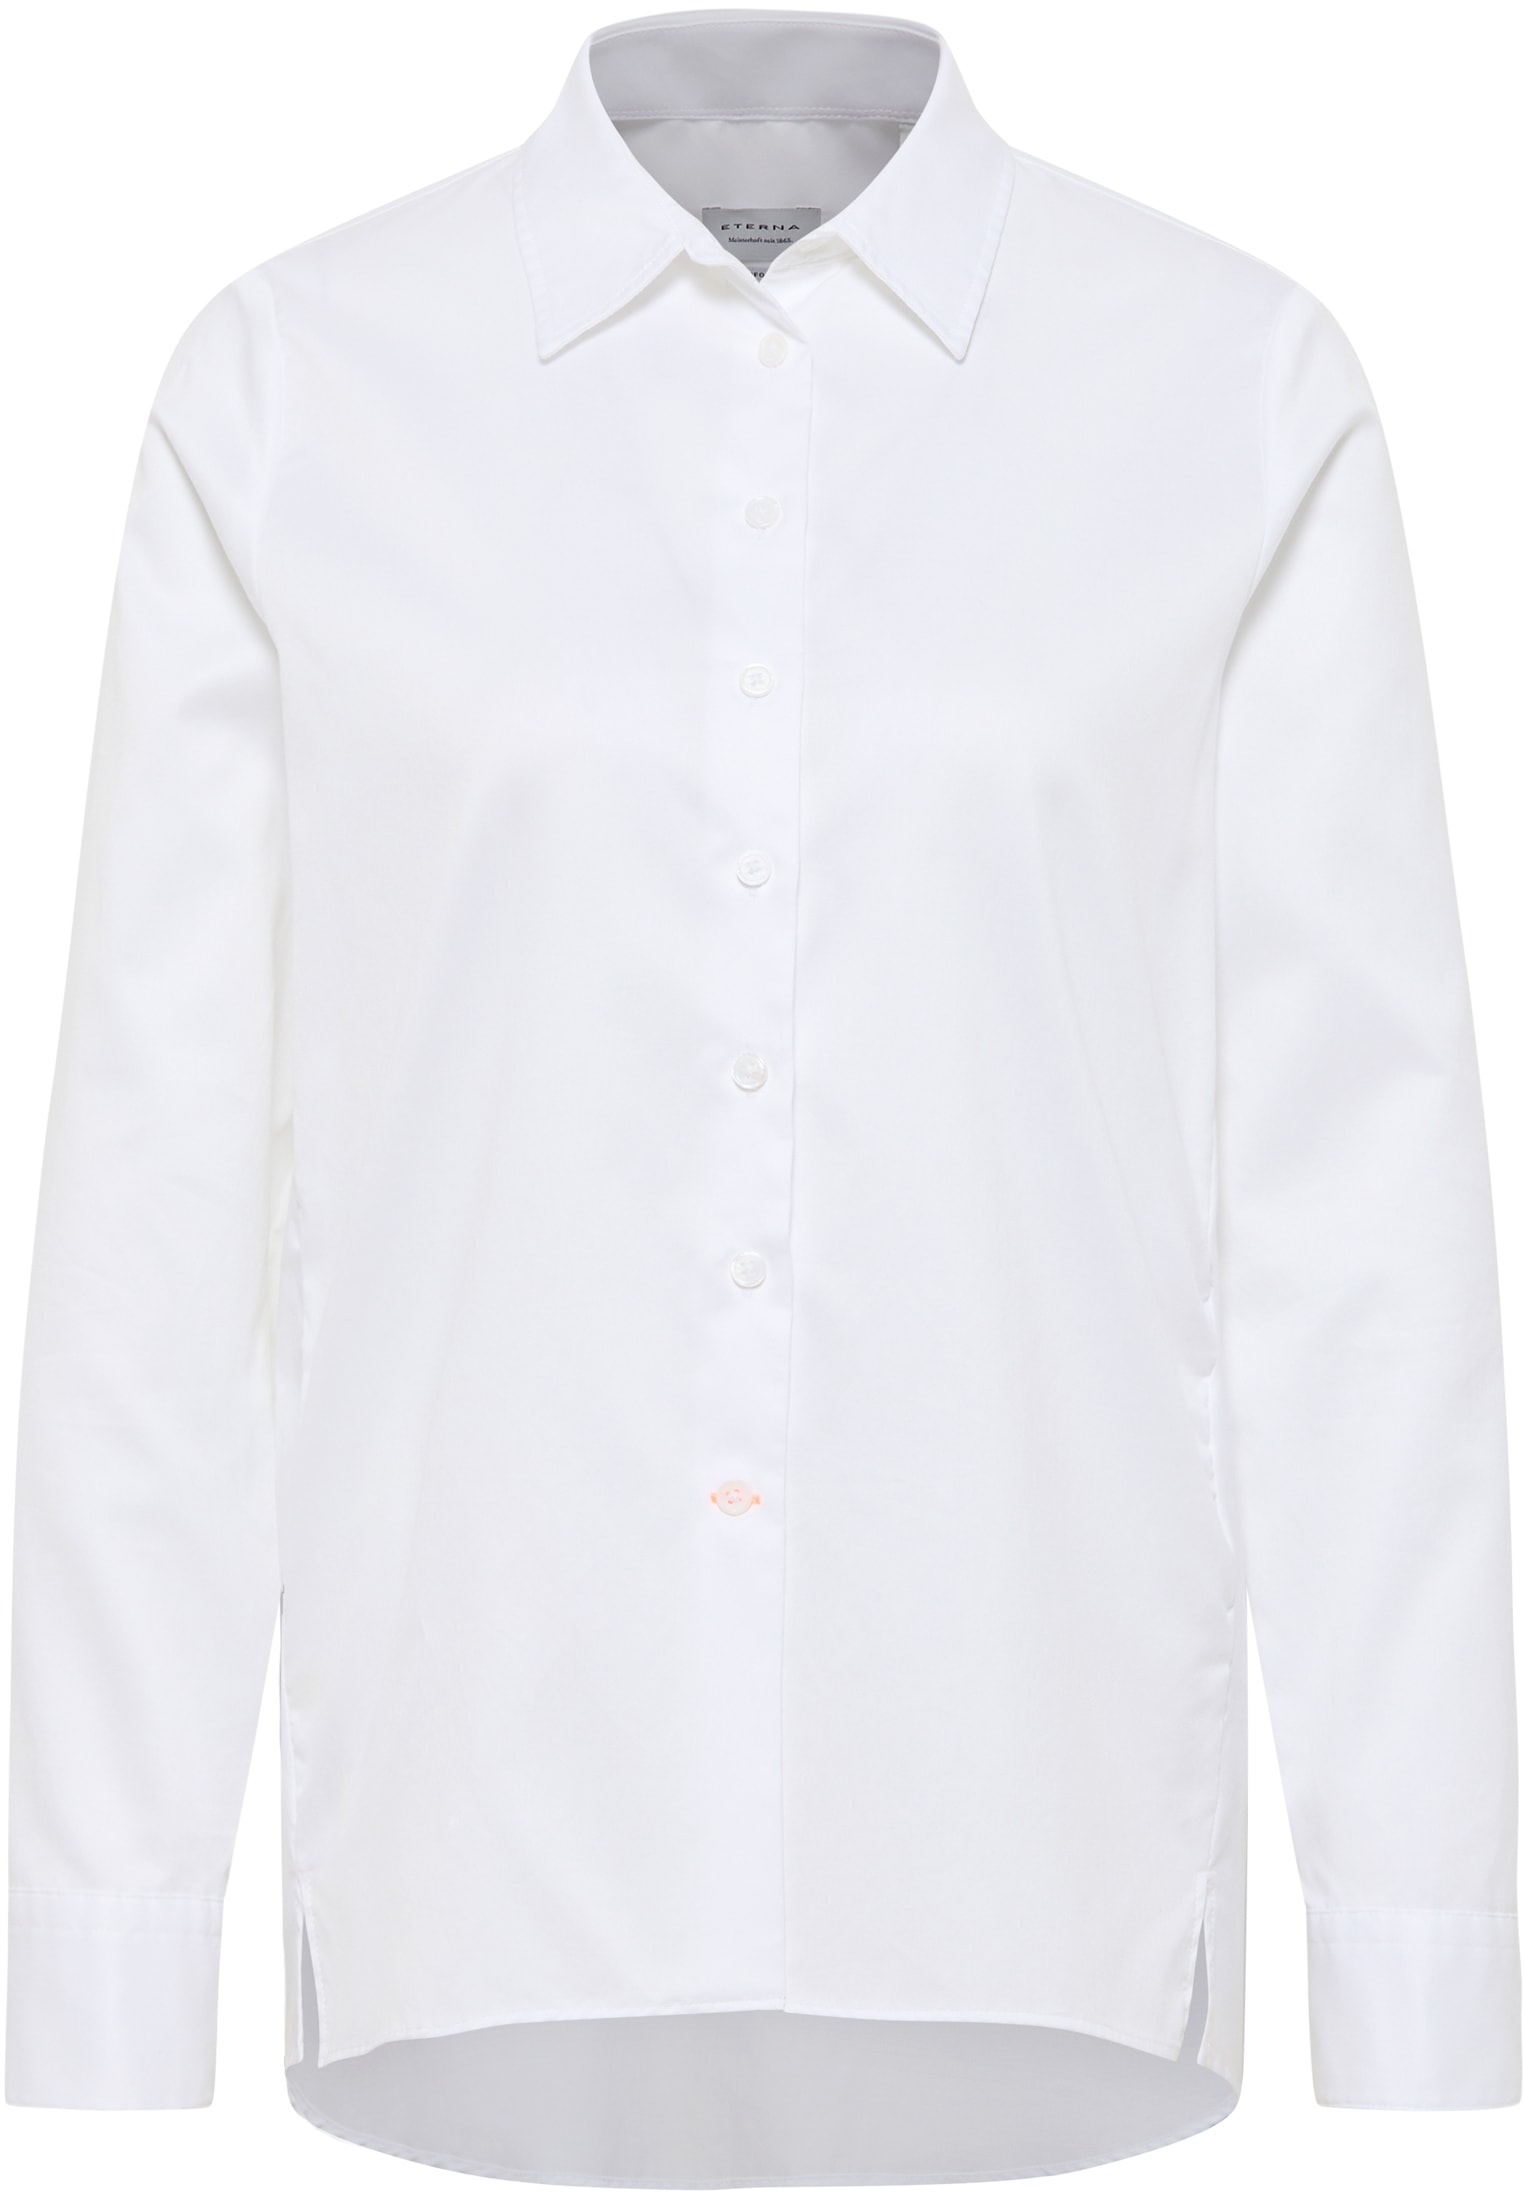 Shirt unifarben | | in Bluse off-white off-white 2BL00664-00-02-34-1/1 Langarm Luxury Soft | 34 |